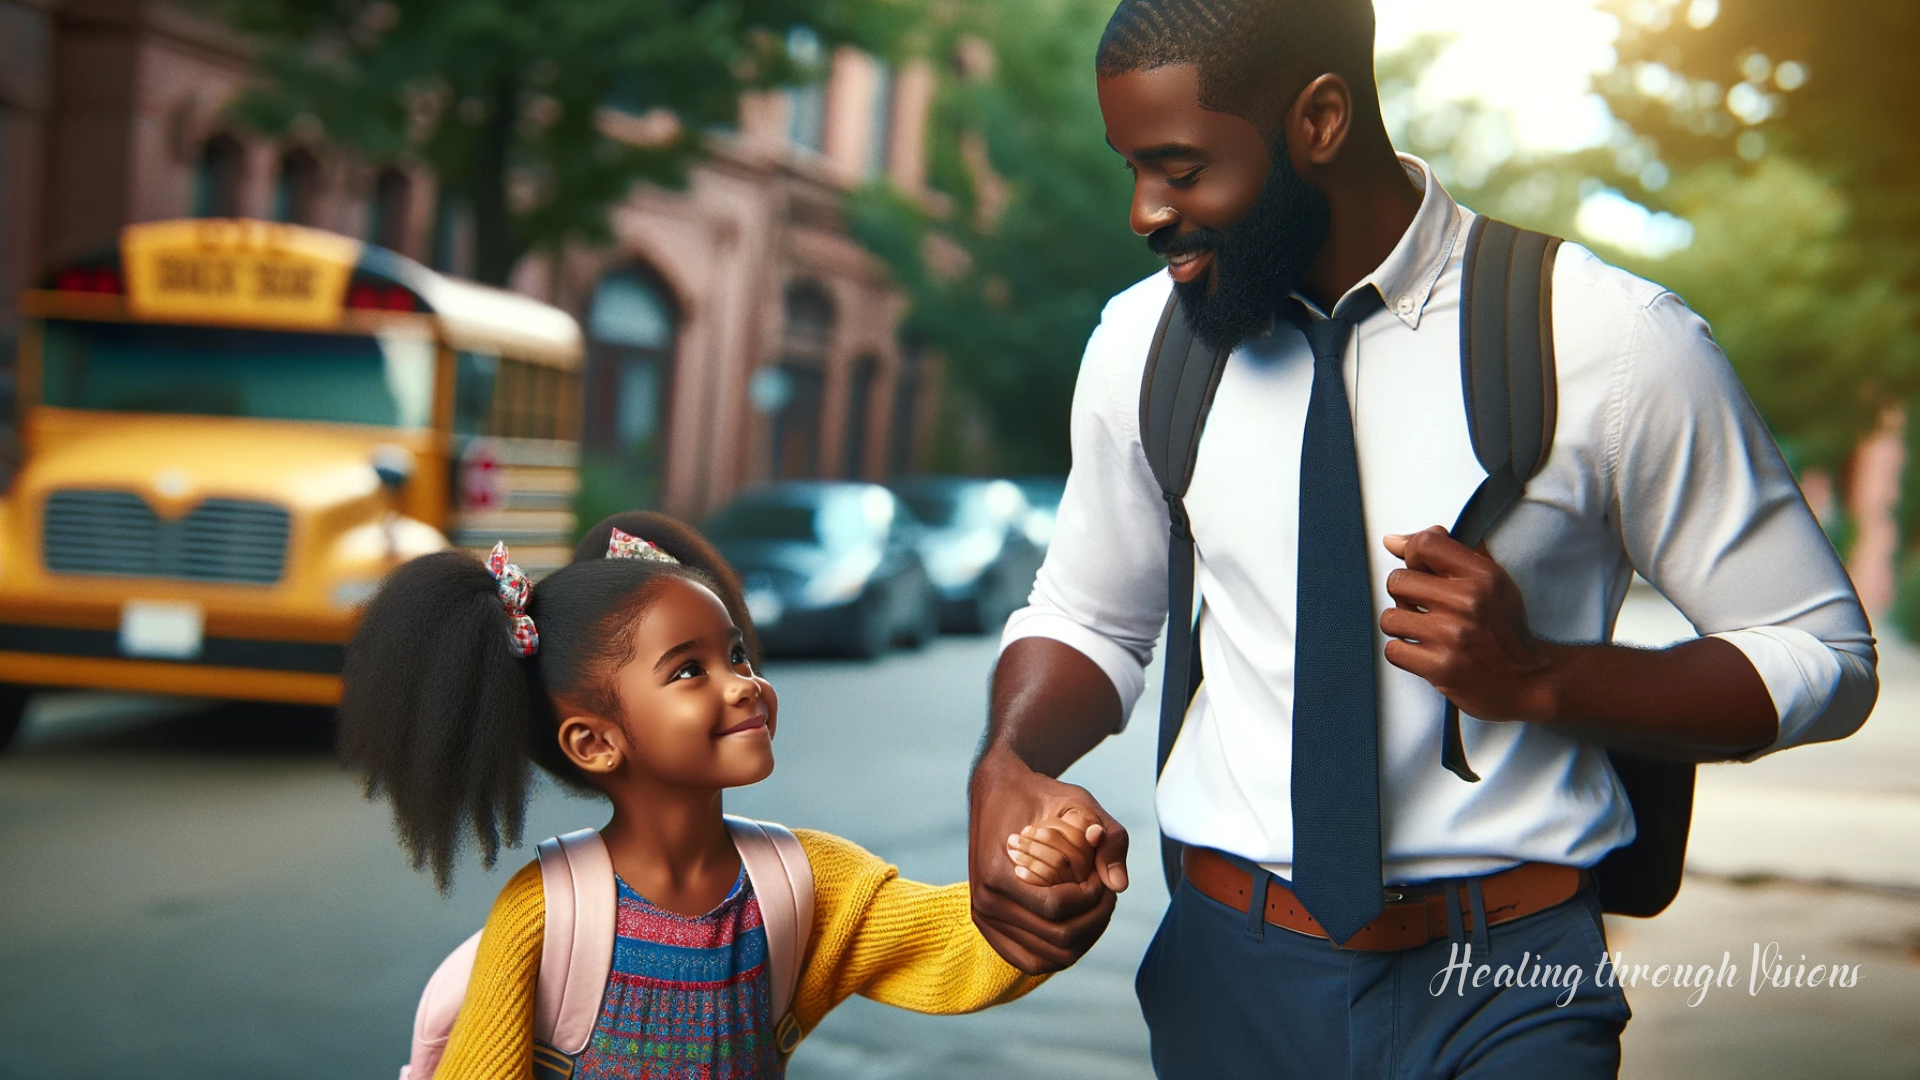 A strong, nurturing, protective Black father, holding the hand of his Black daughter as they cross the street after school. The daughter has pigtails and is wearing a colorful outfit. She is smiling, conveying a sense of safety and joy being with her father. The setting is a typical street scene, capturing a tender, everyday moment.